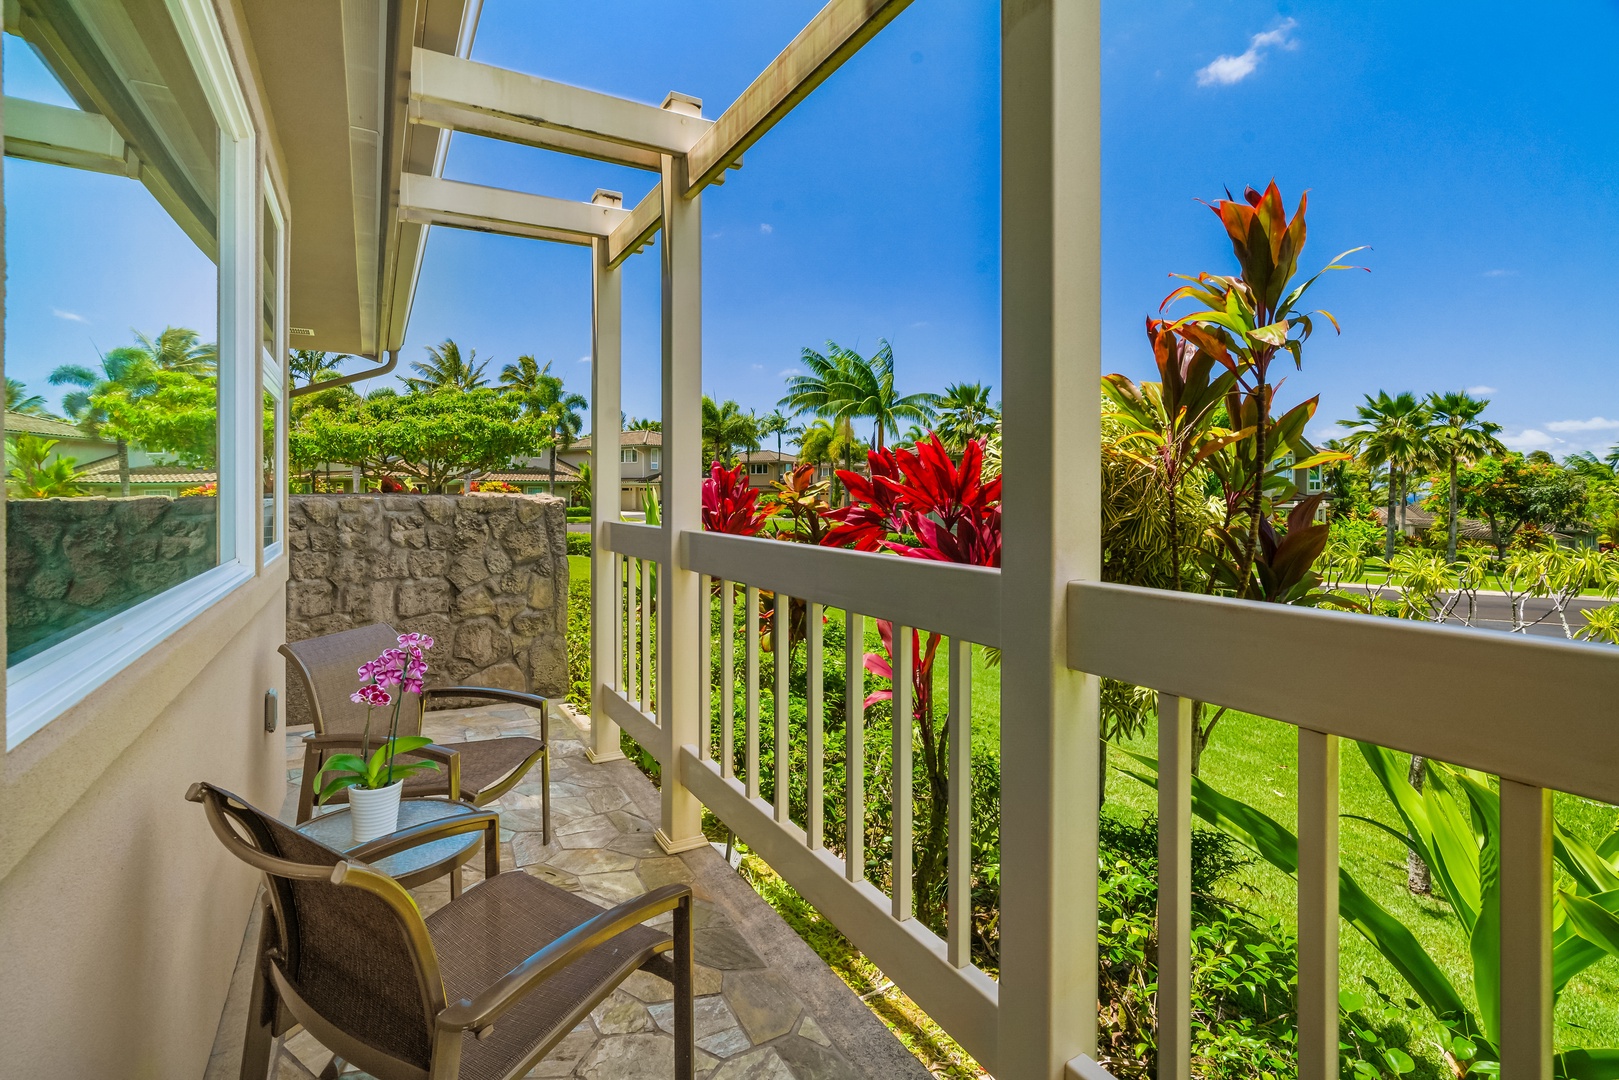 Princeville Vacation Rentals, Noelani Kai - Unwind on our spacious balcony, an ideal perch to enjoy tranquil moments and soak in the stunning views.